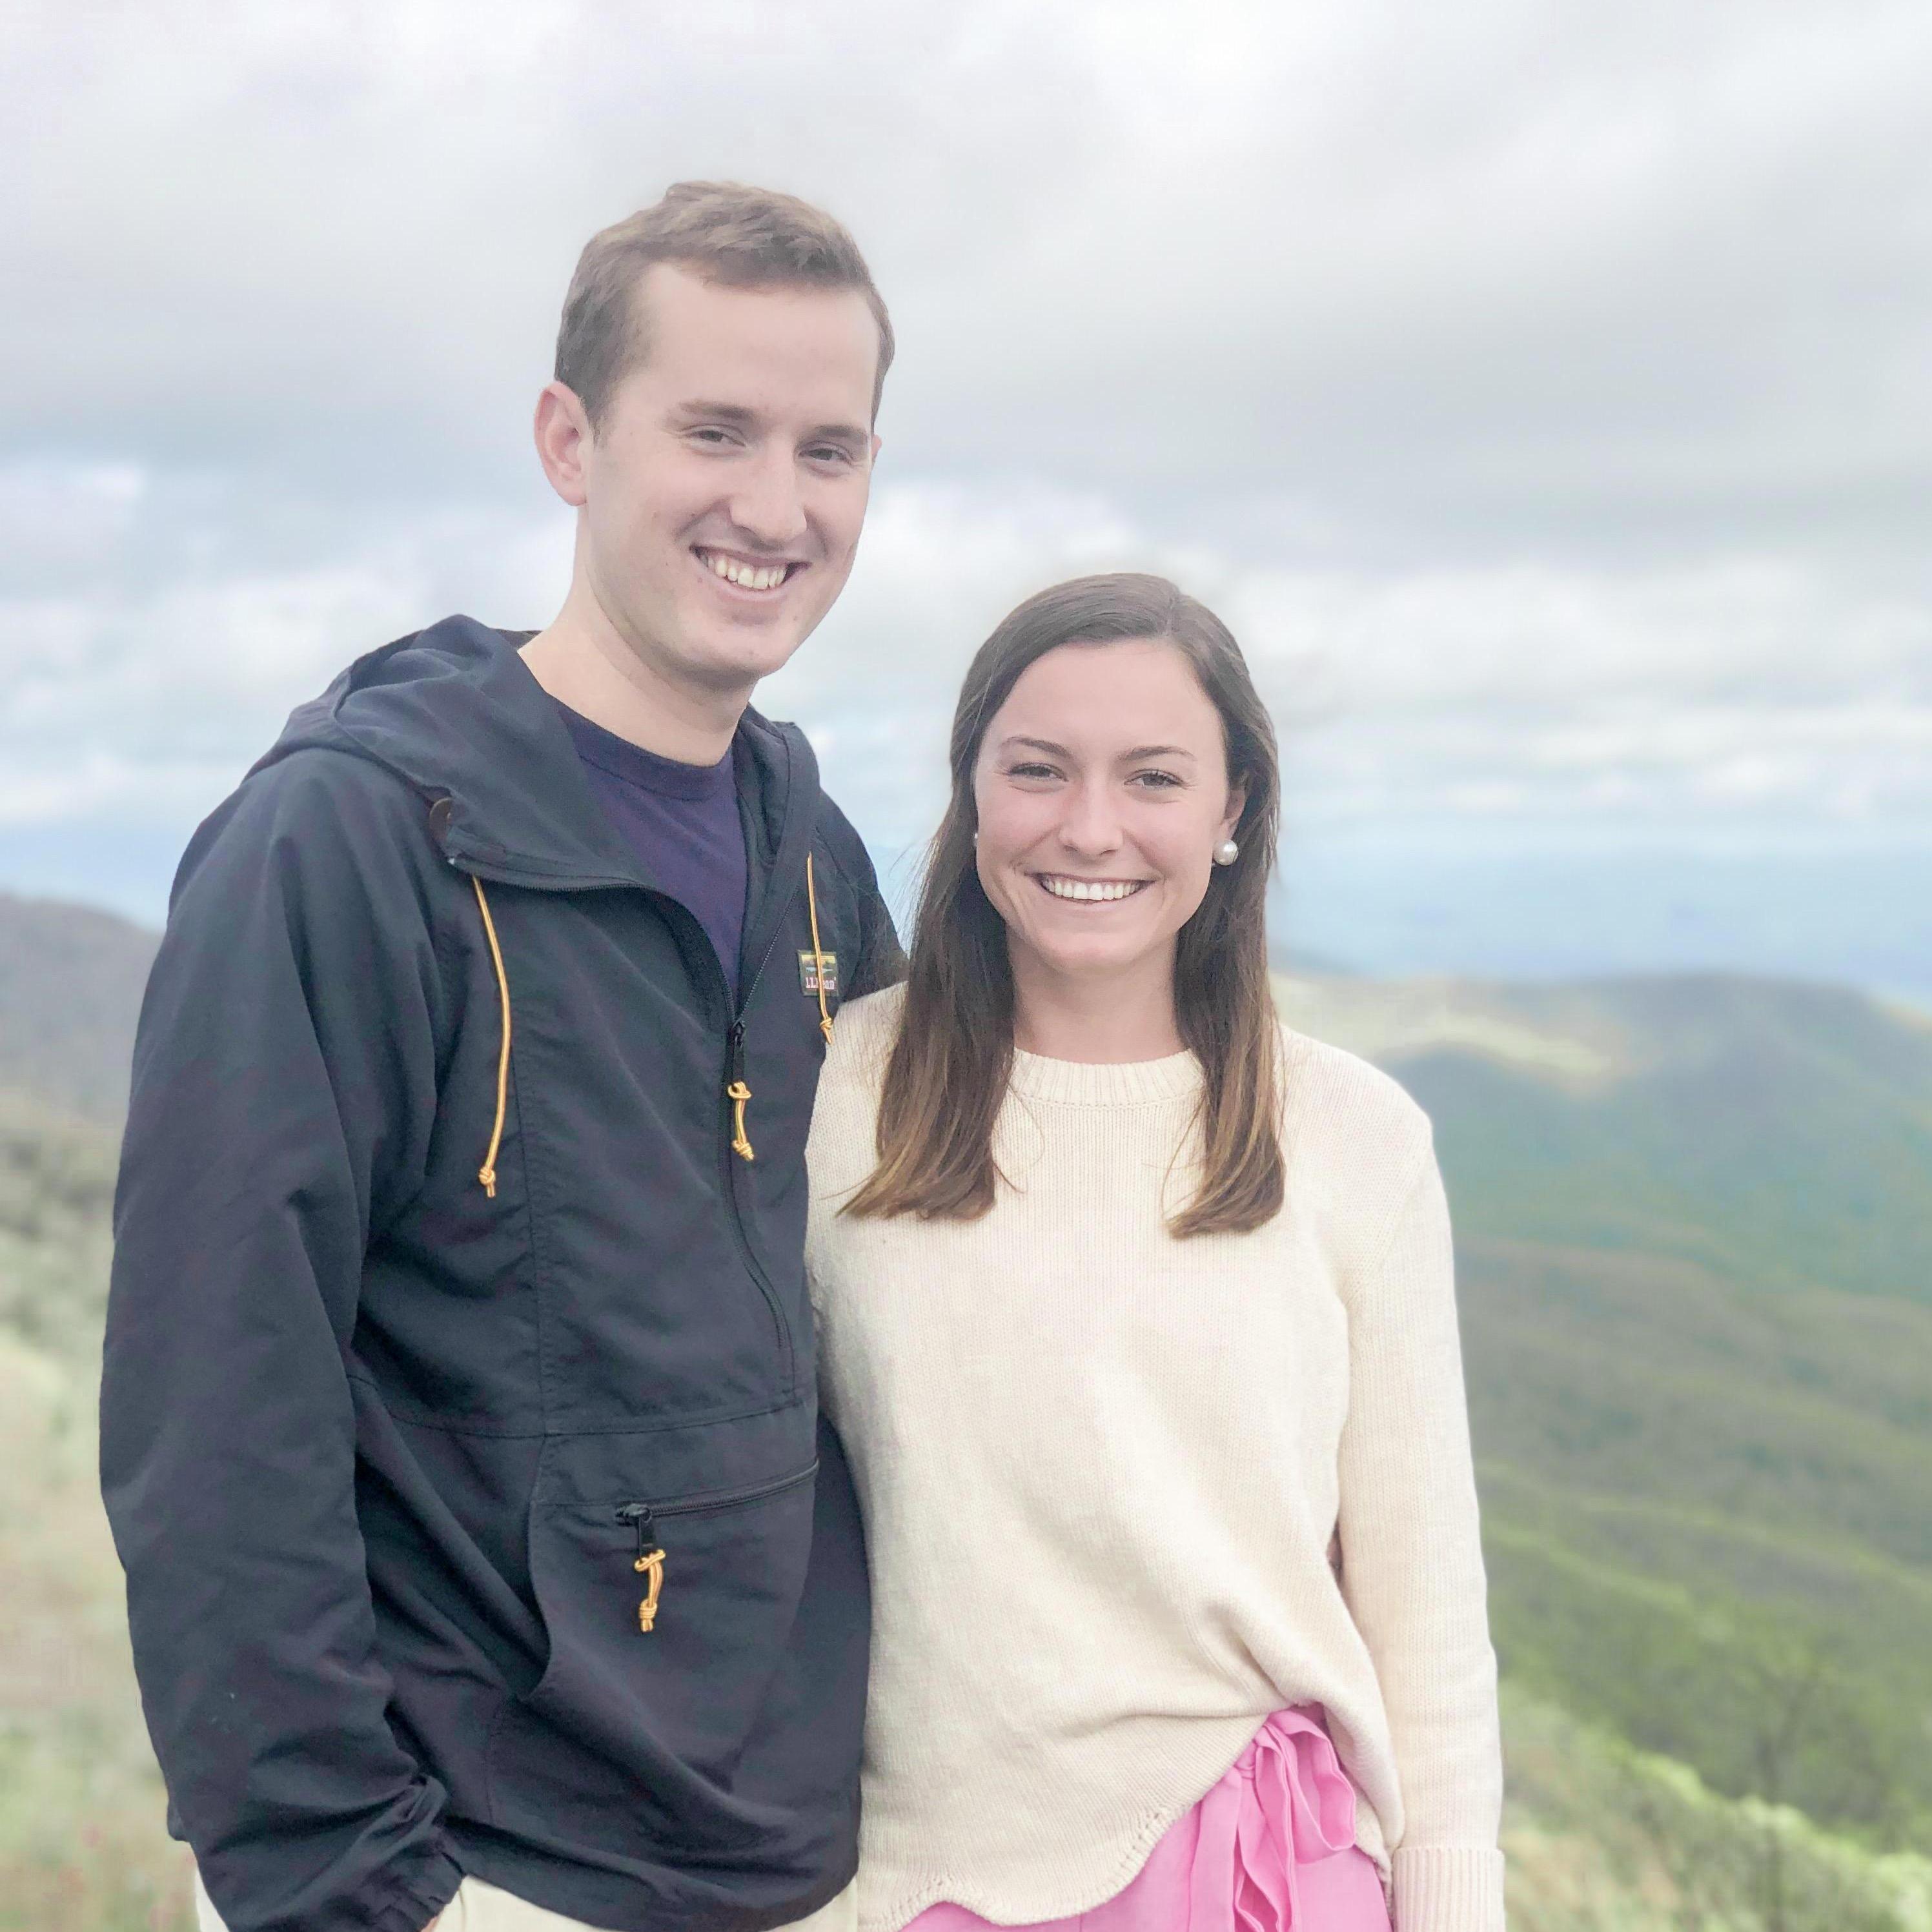 Drove through the blue ridge mountains in May on the way to EM (the next day they pictures became engaged!)